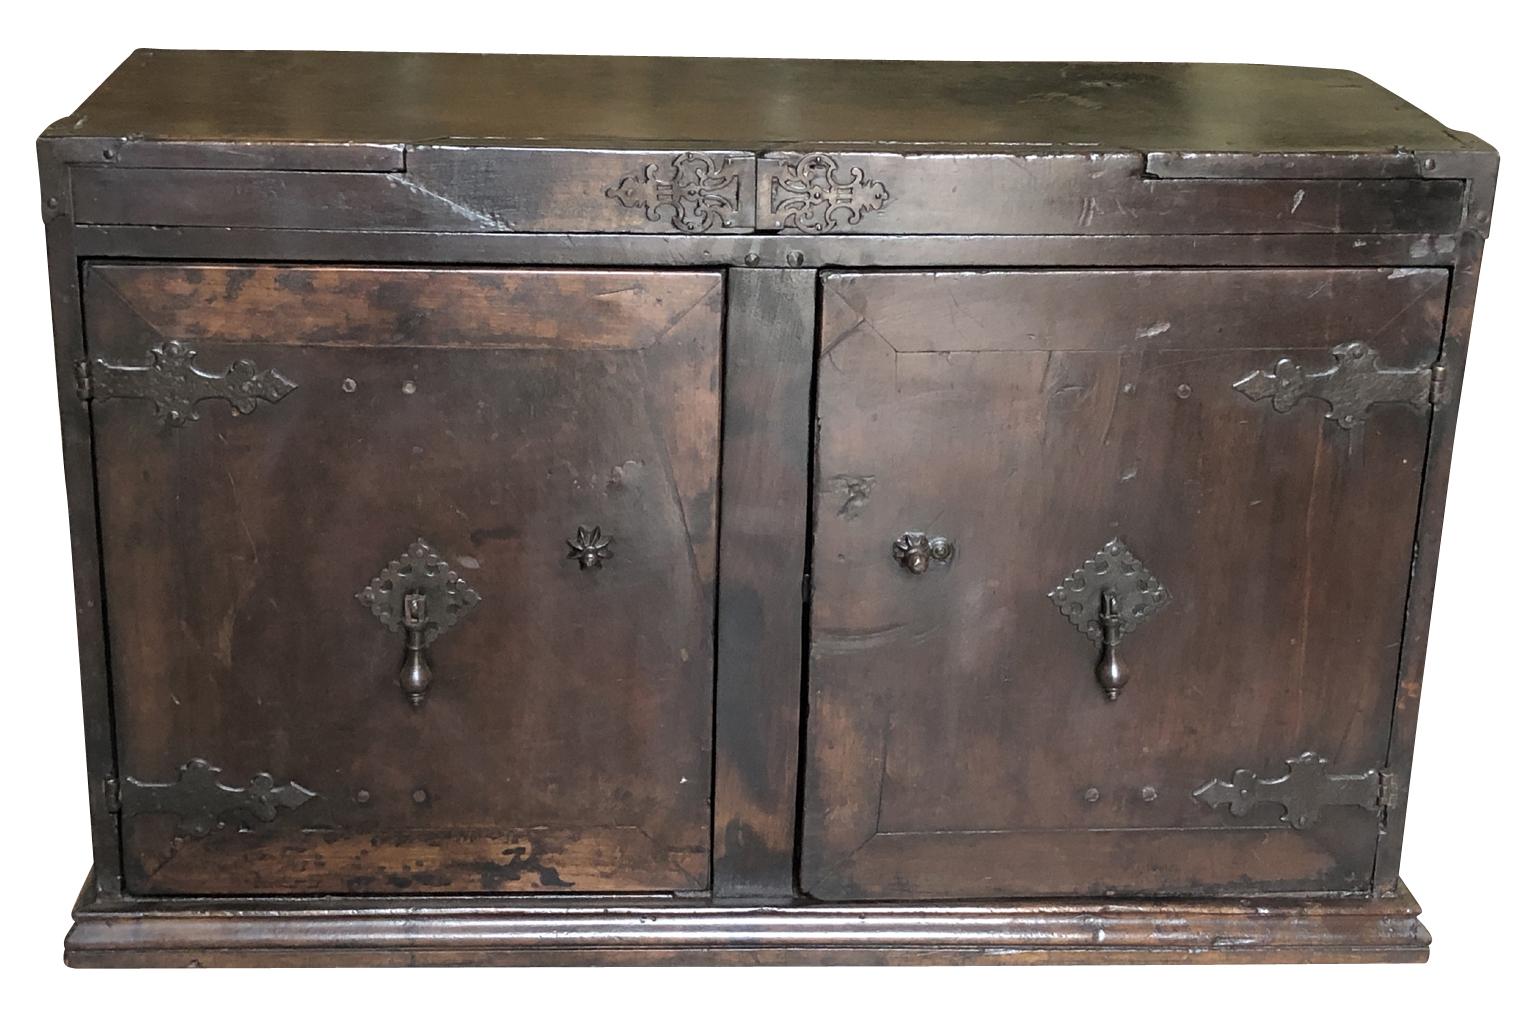 A very handsome early 18th century Sacrestia buffet from Portugal. Beautifully constructed from walnut with handsome iron fittings. The cabinet has an excellent patina. Nice narrow depth.